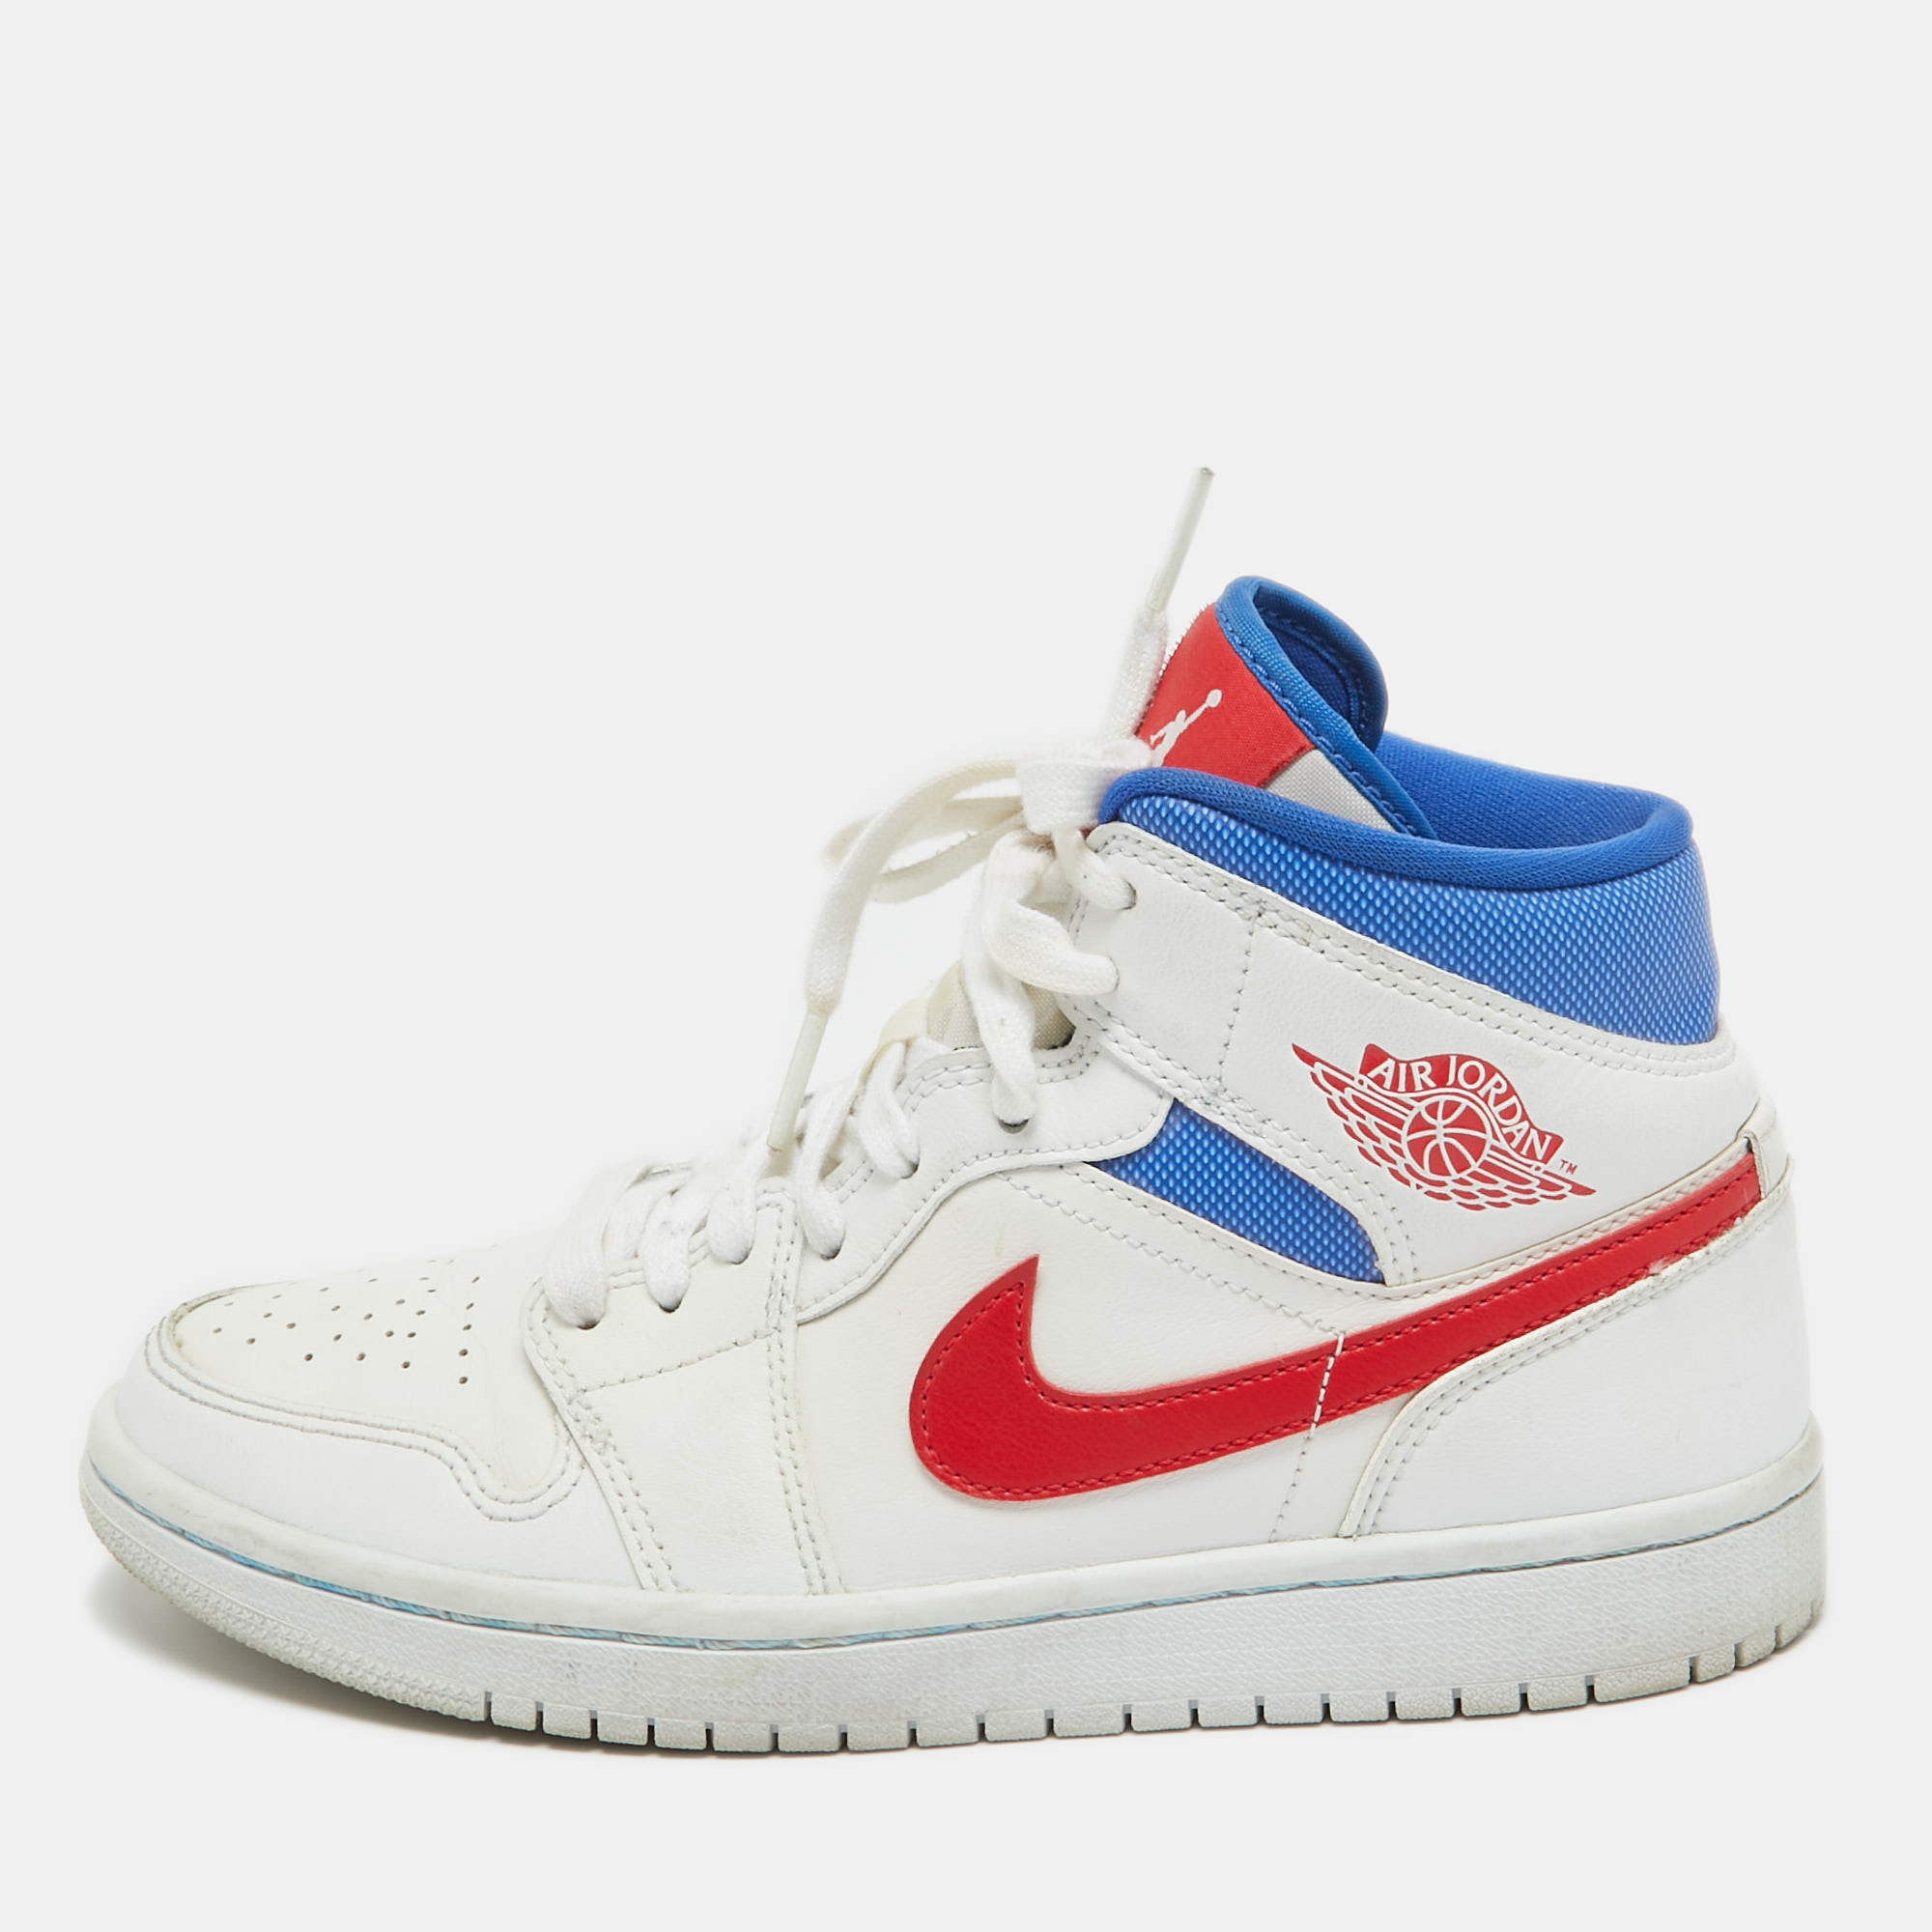 The Air Jordan 1 Mid sneakers exude timeless charm with their pristine white base accented by bold splashes of blue and red. Crafted from premium leather they boast durability and style. Whether on the court or the streets these sneakers make a statement of classic athleticism and flair.